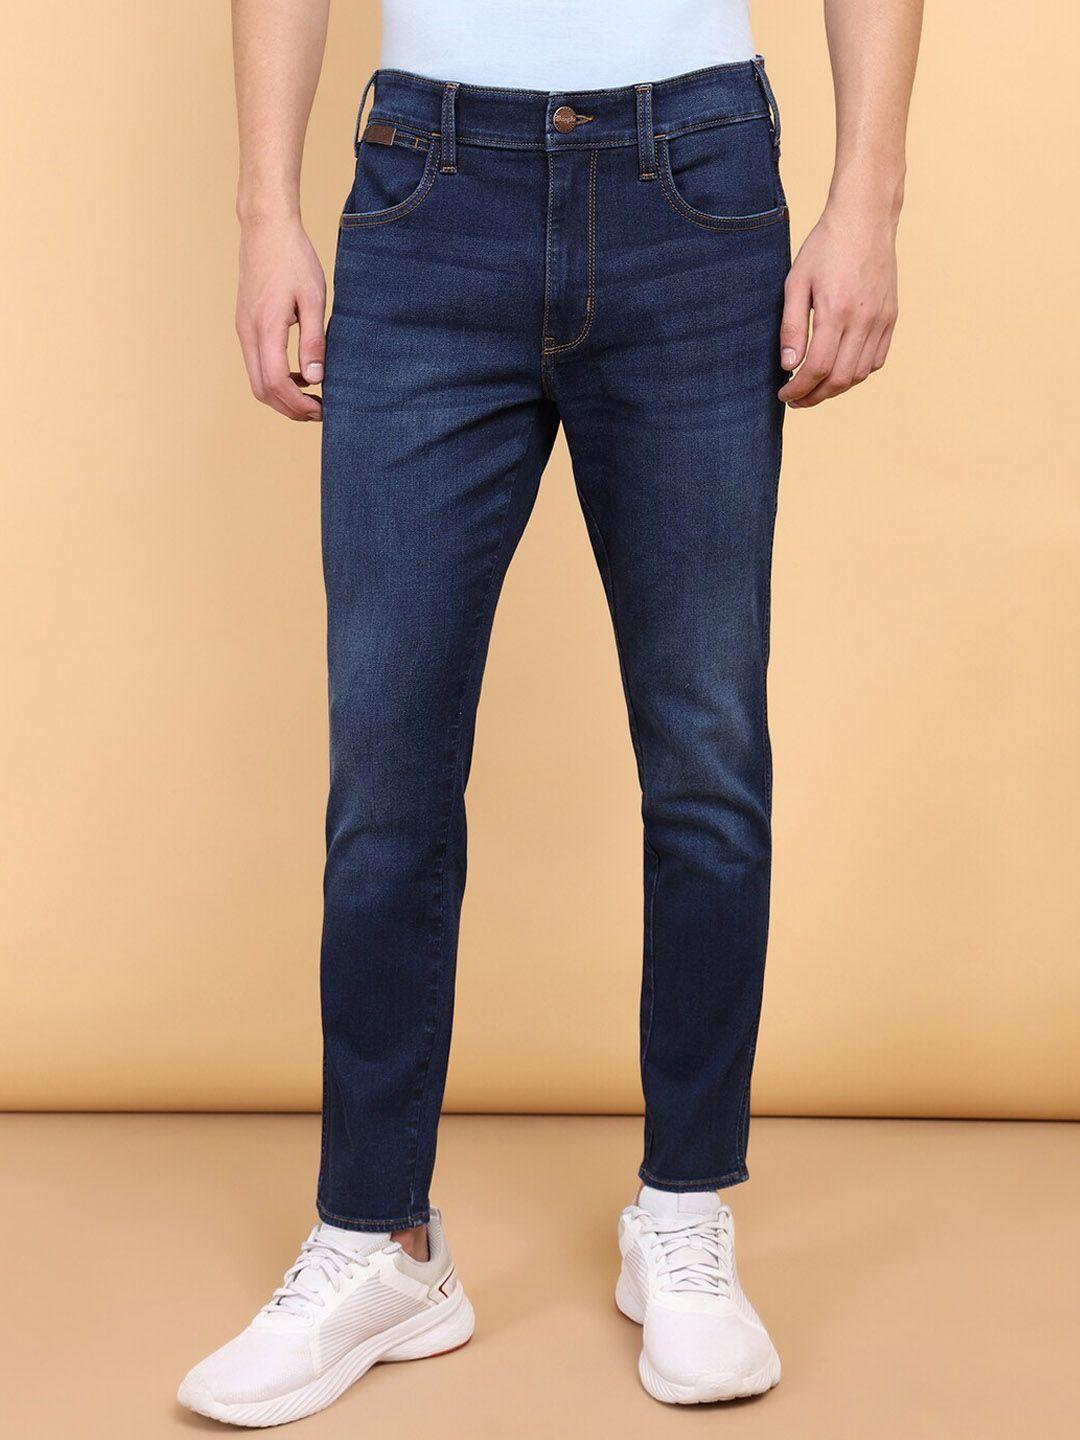 wrangler-men-vegas-skinny-fit-low-rise-clean-look-stretchable-jeans